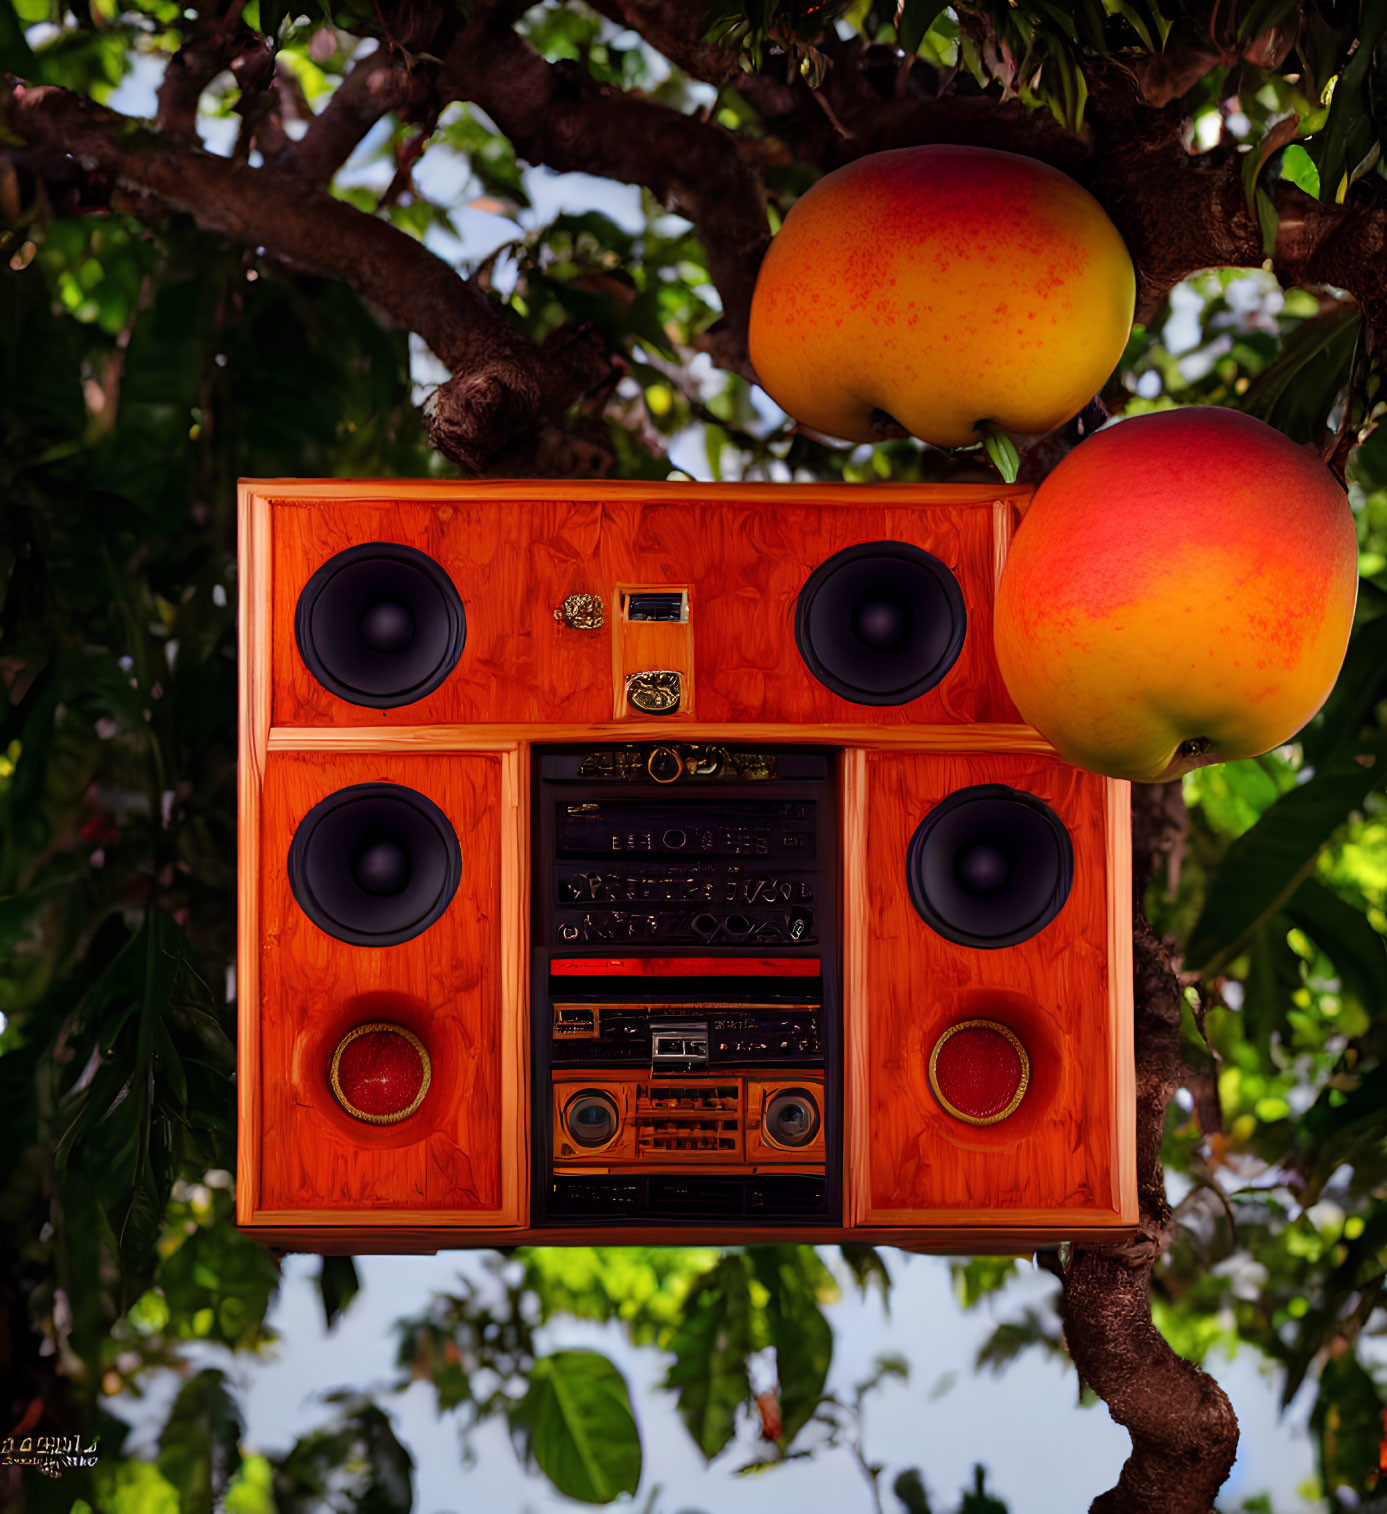 Vintage boombox with wood finish in nature setting among mangoes and green leaves